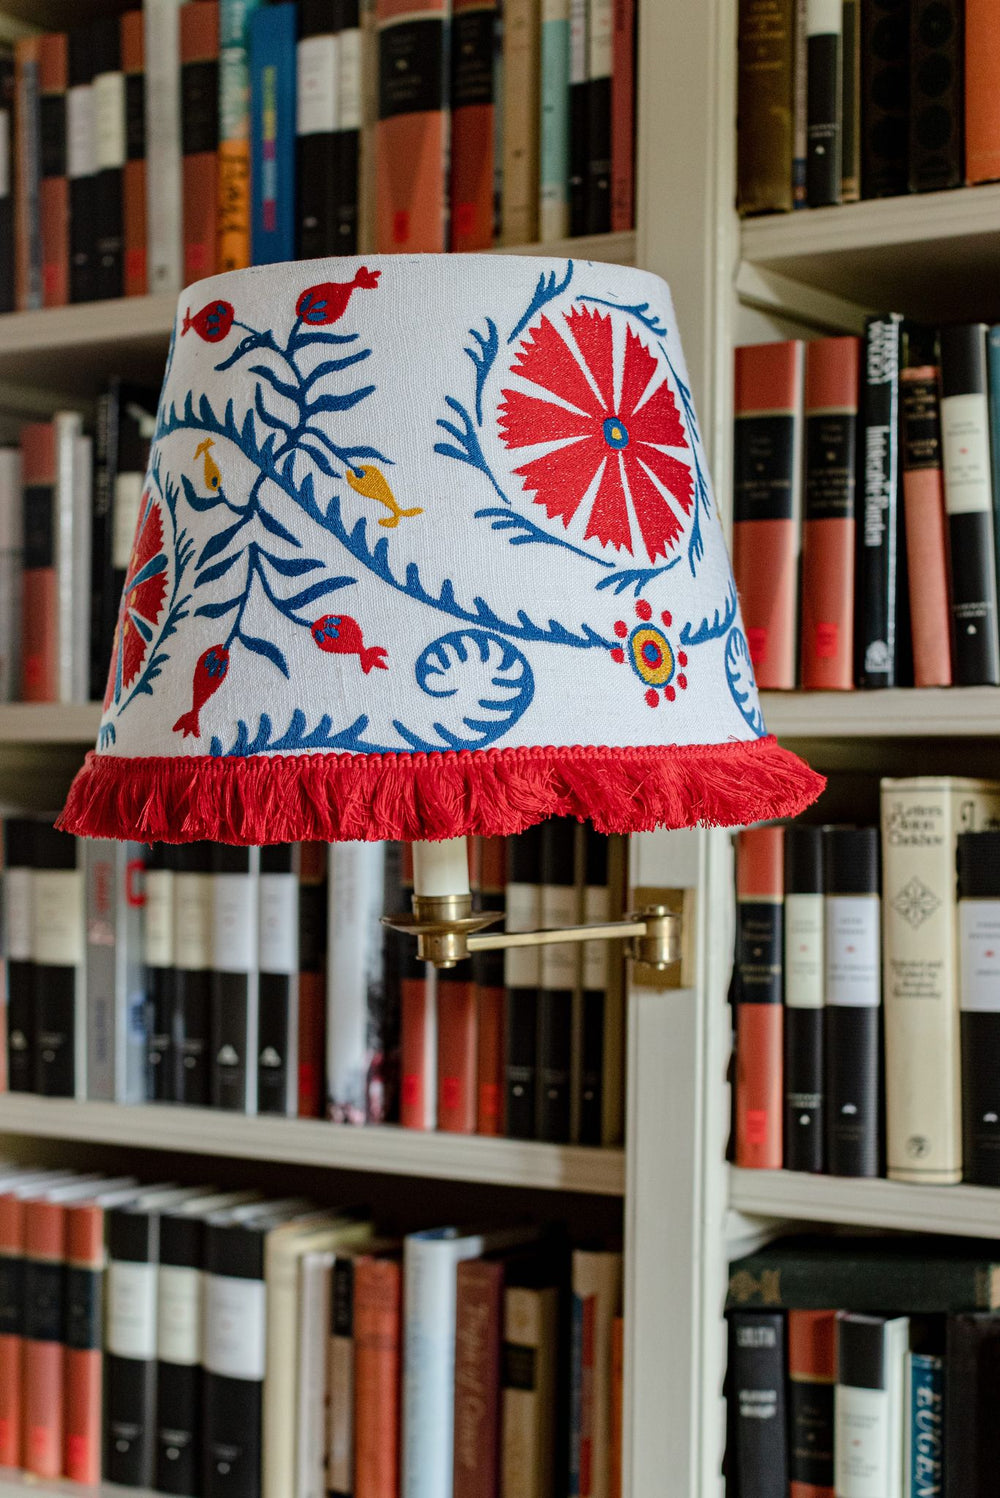 mind the gap embroidered cone lampshade viragos folk design with fringing wall light on book case